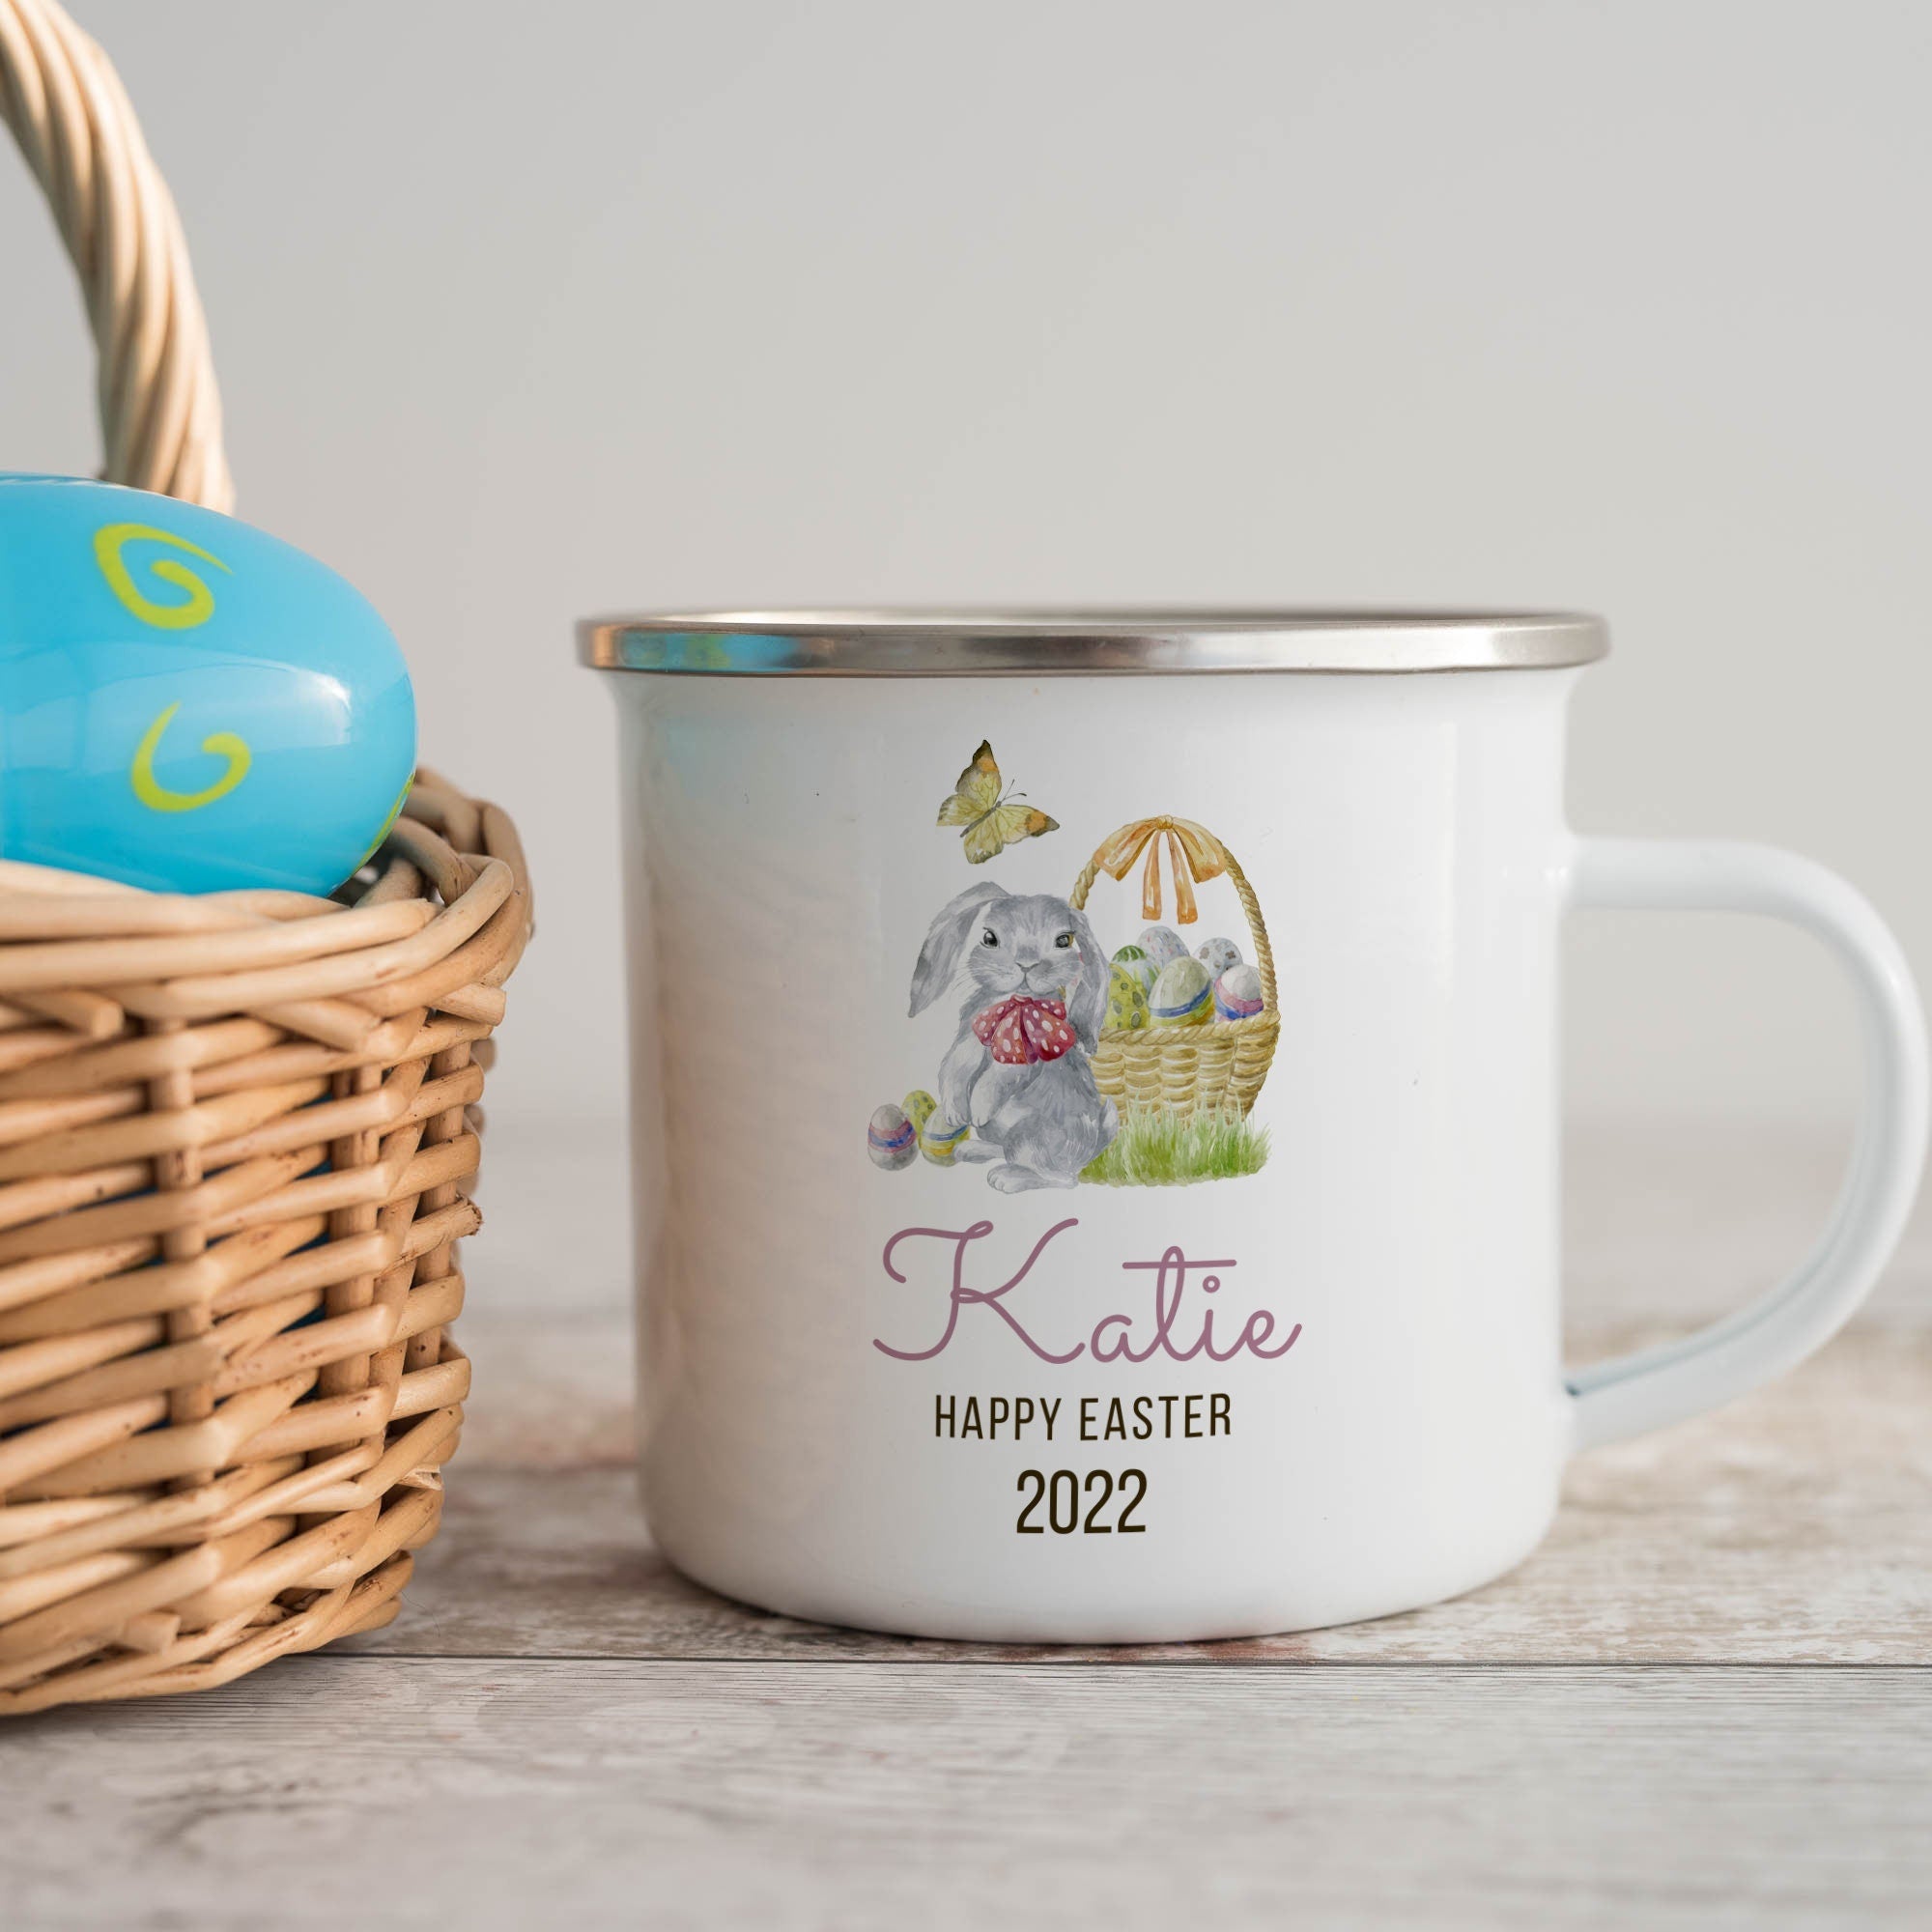 Personalised My First Easter Enamel Mug with Name, Baby Easter Keepsakes, 1st Easter Gift